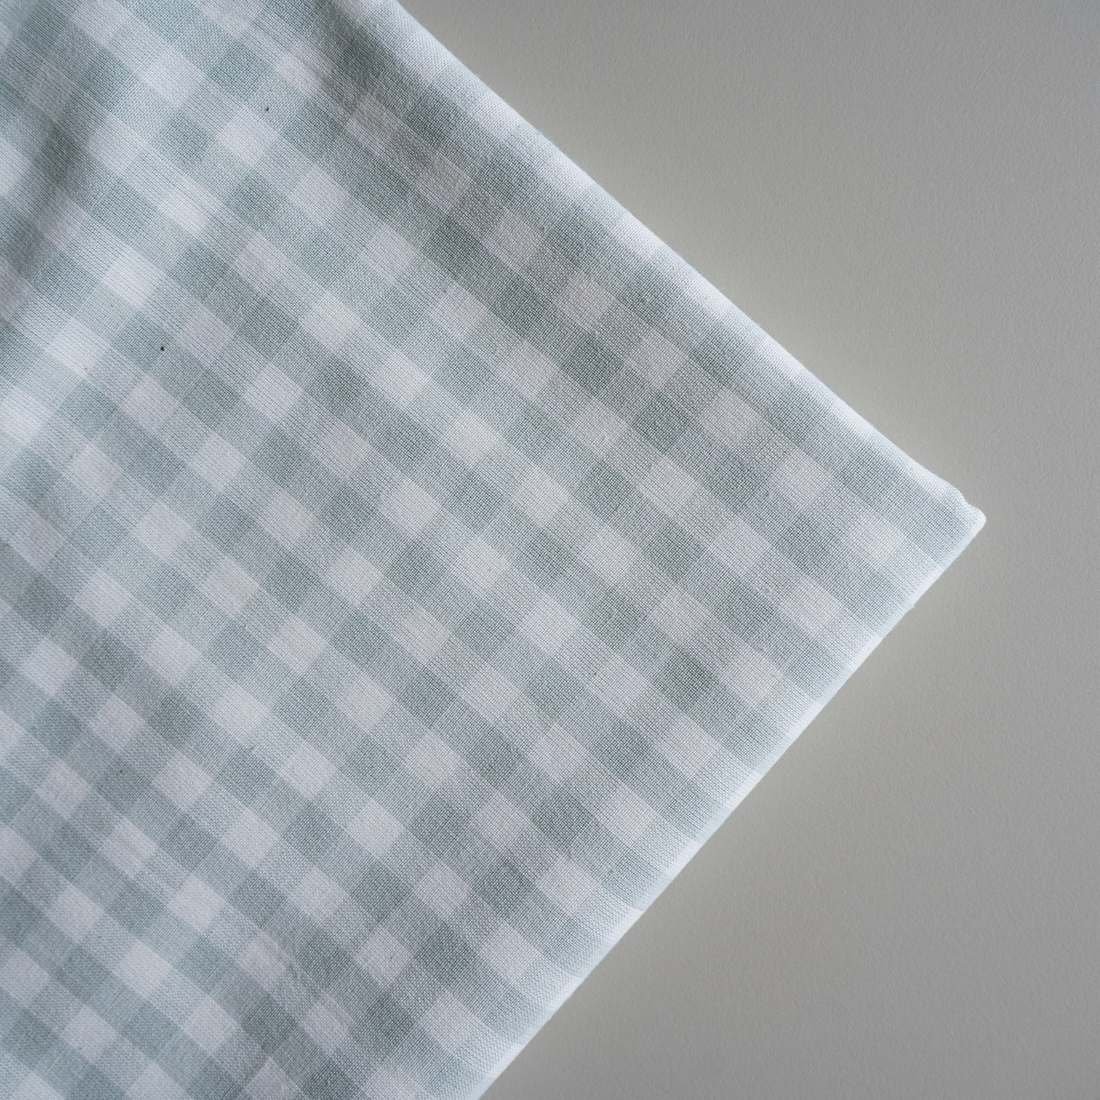 1.4m REMNANT - Mist Small Check Gingham - Cotton